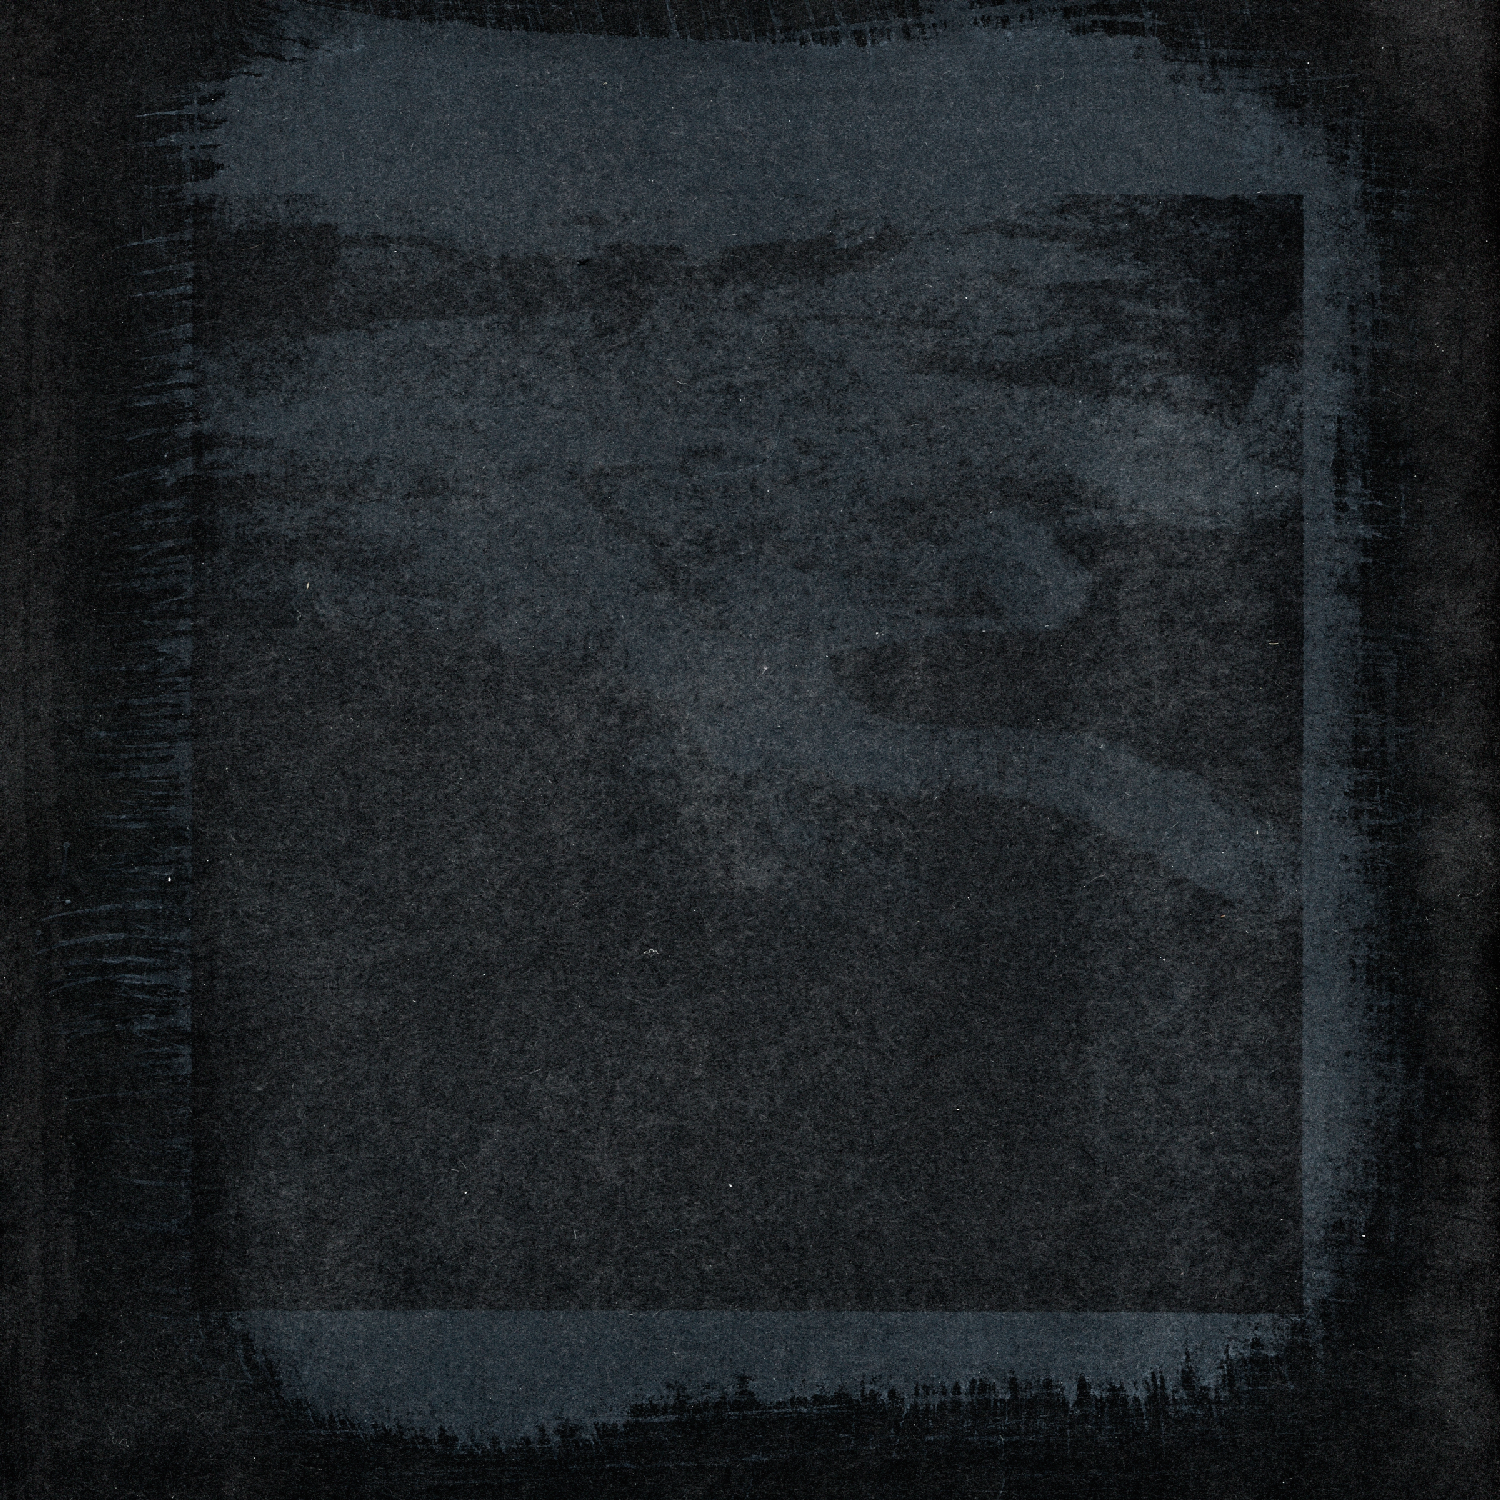 8/31: white gum bichromate on strathmore black paper, paper positive (note that this paper is terrible, do not use it)